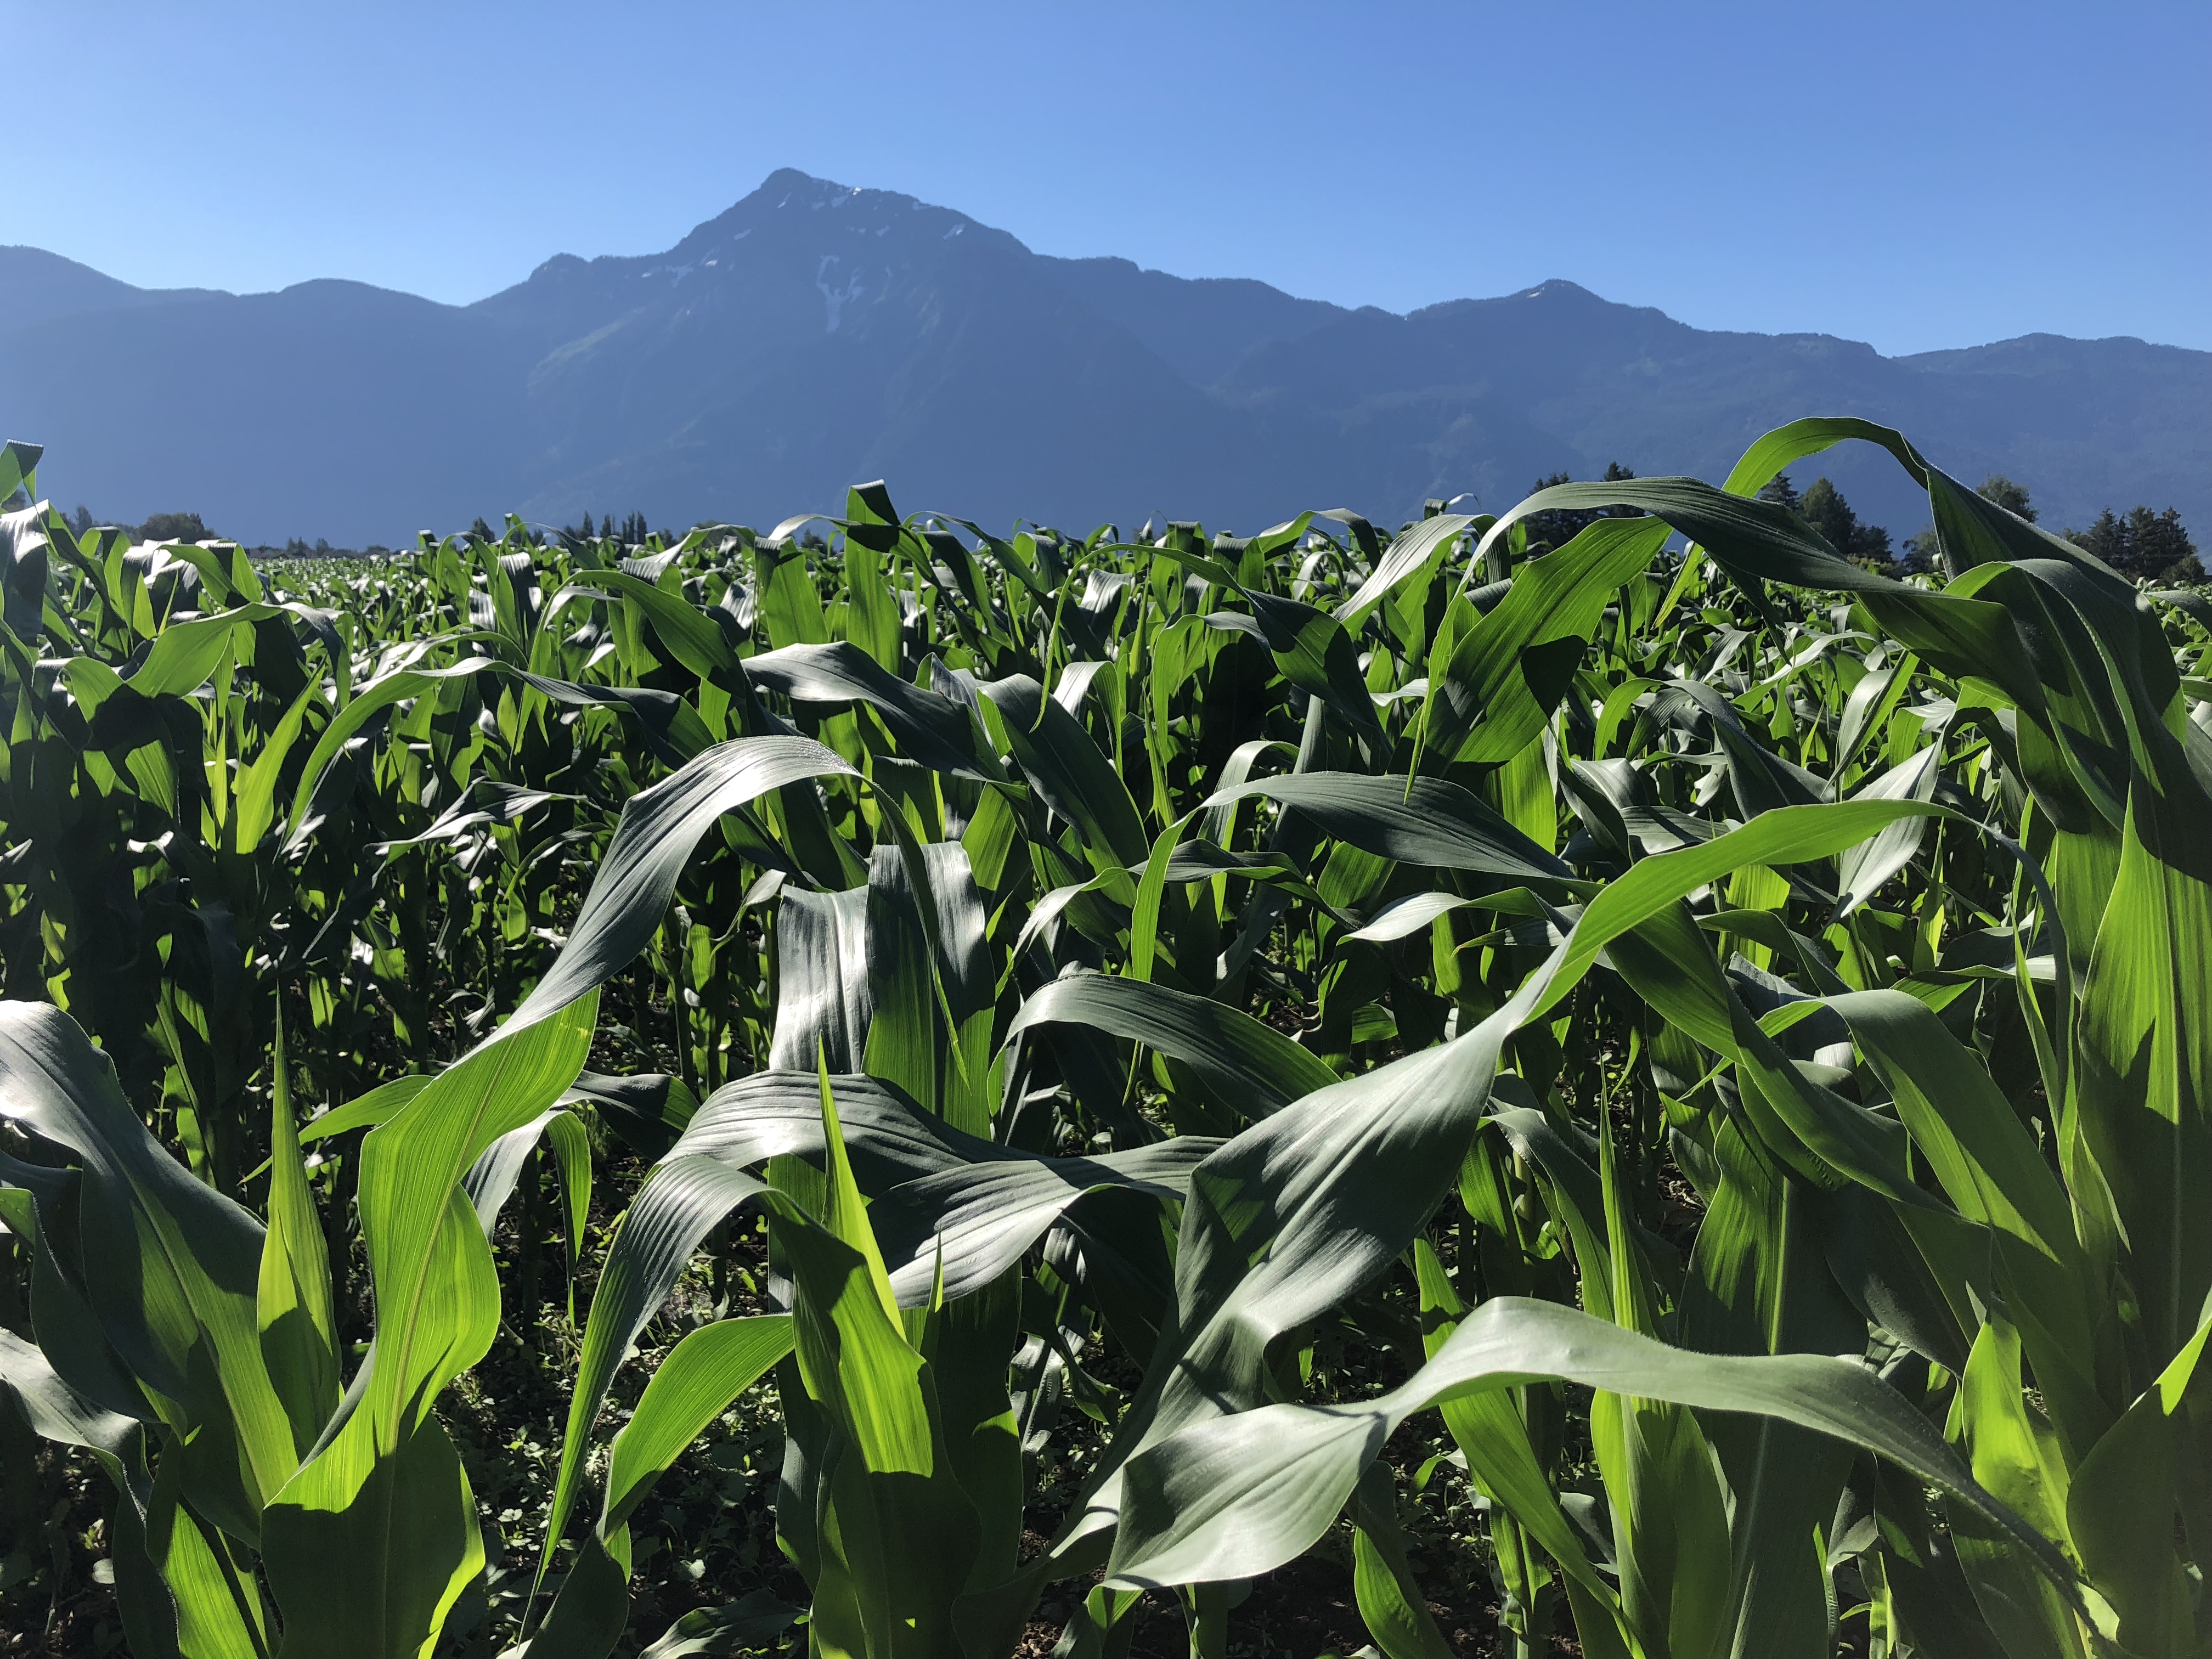 Colour photograph of a corn field in the morning sun with mountains in the background.